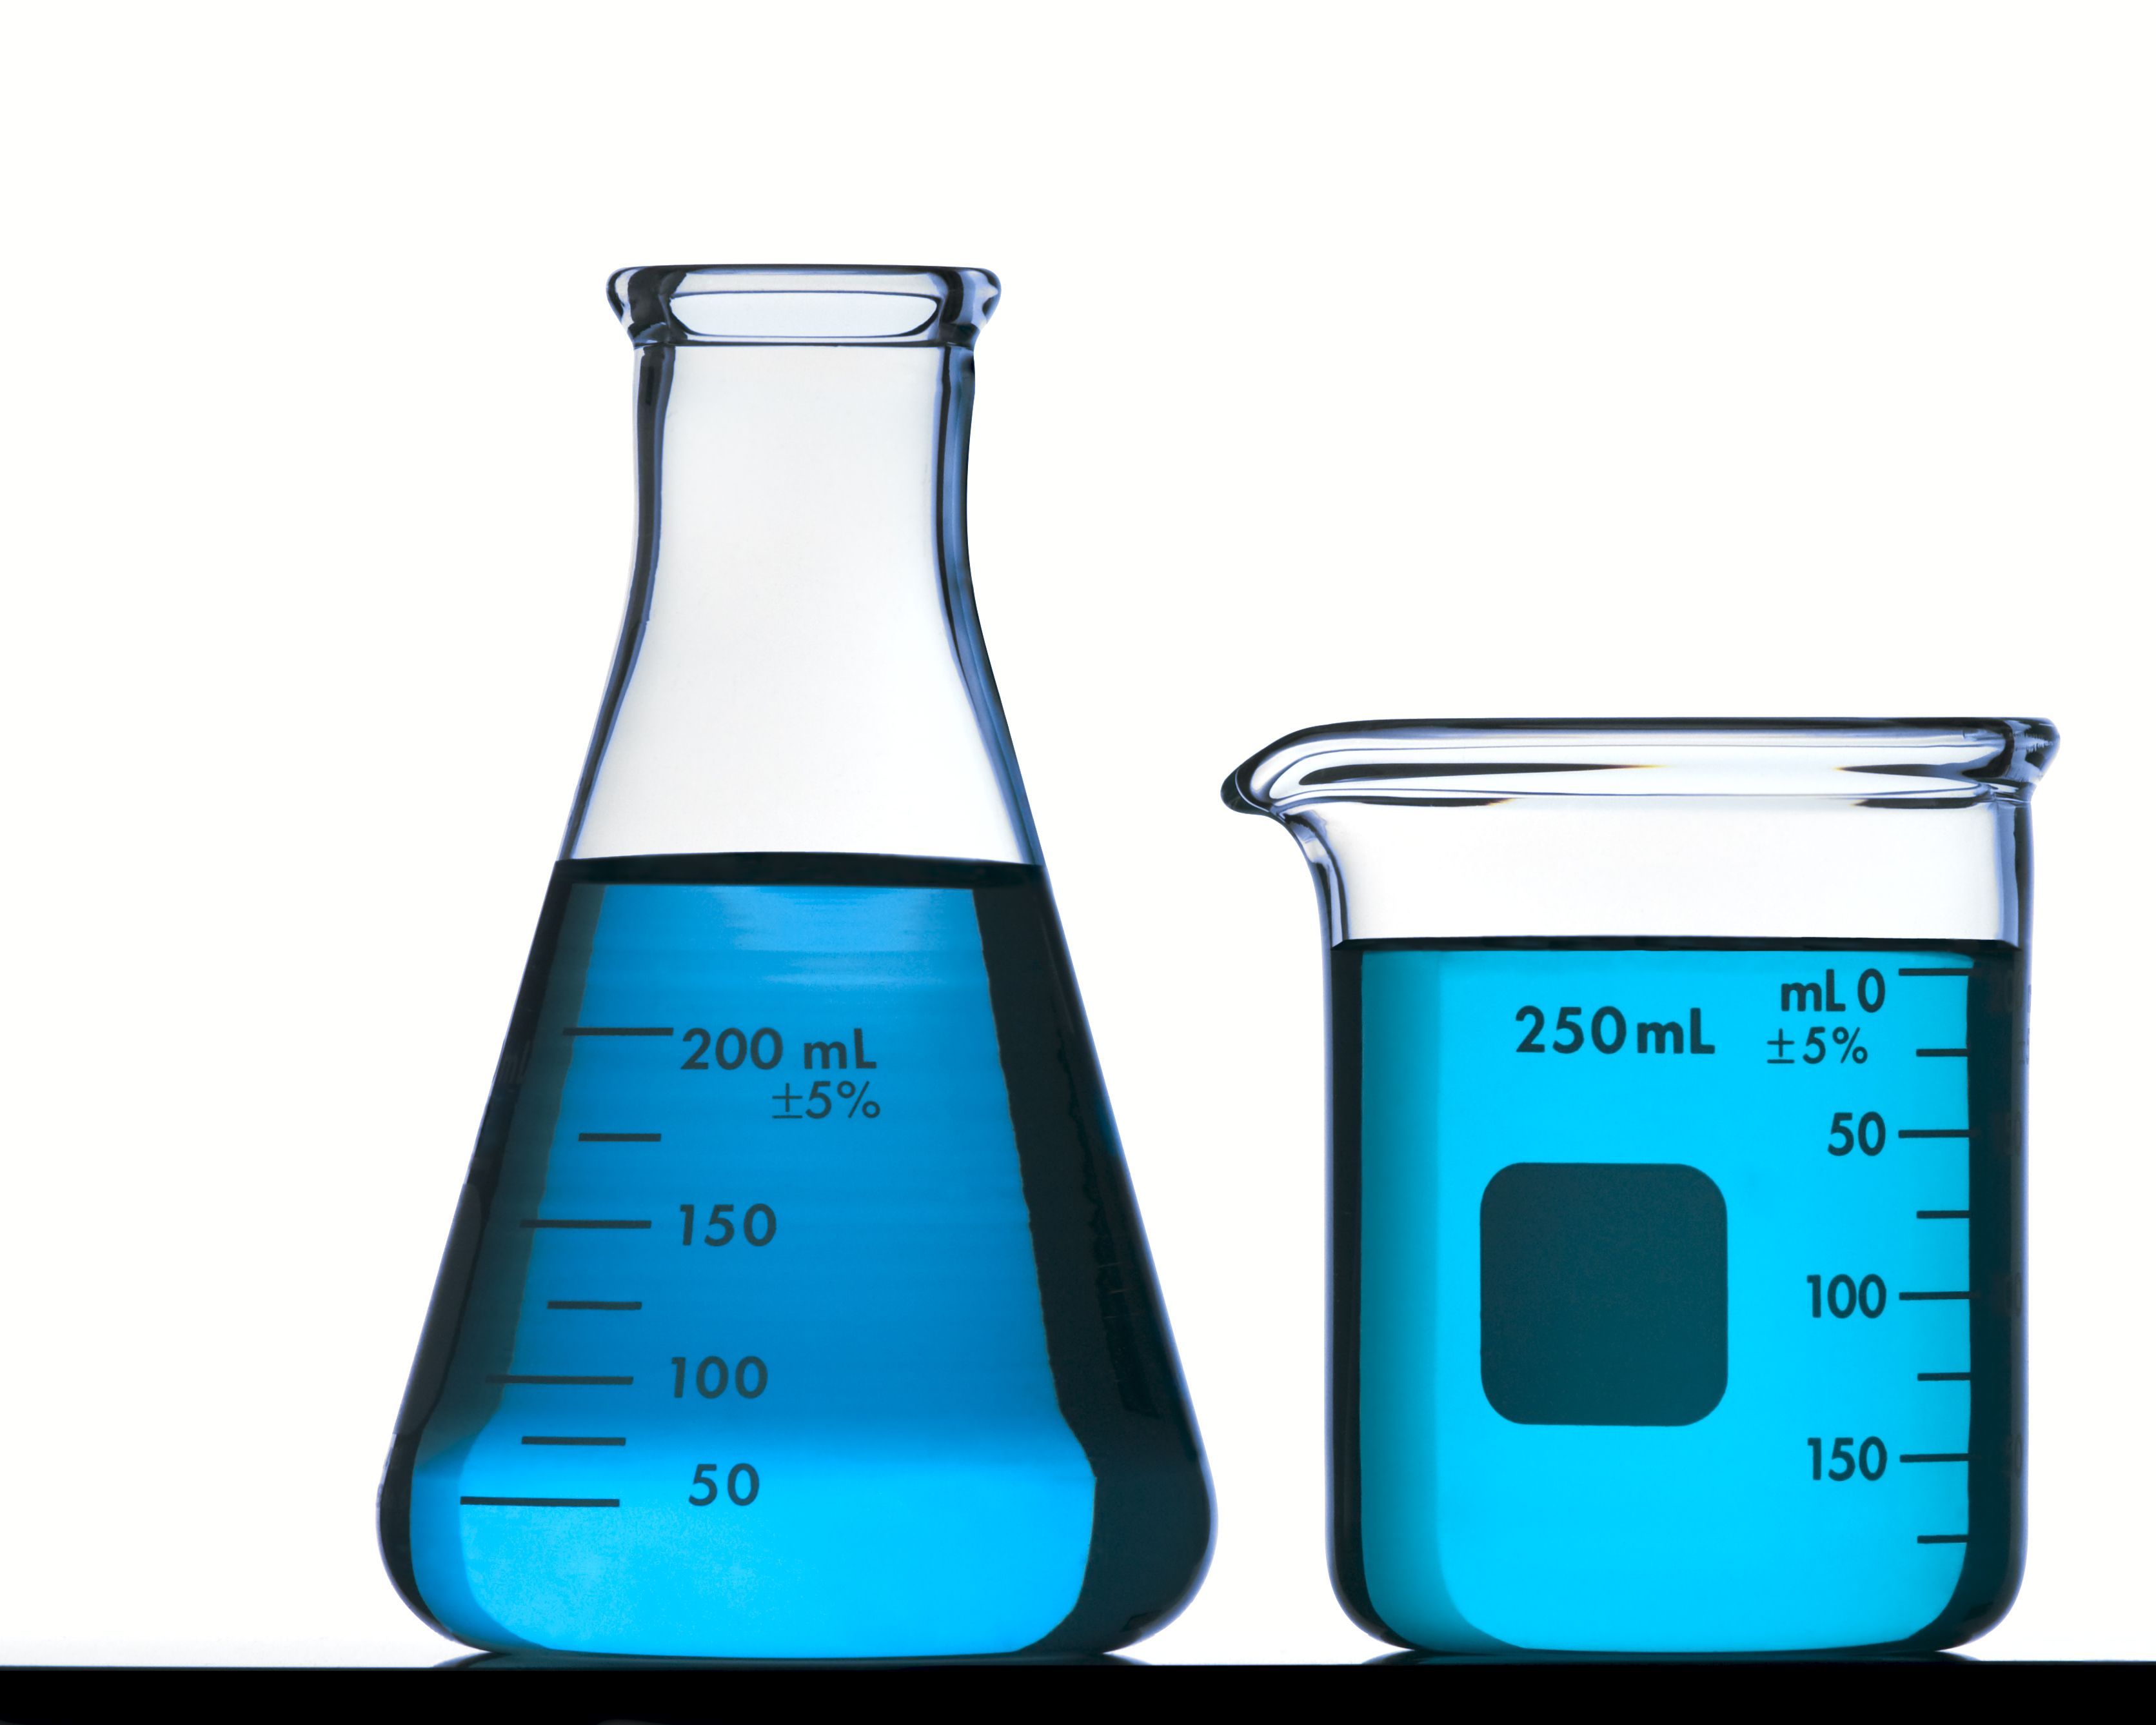 Blue Flask And Beaker Isolated On White With Royalty Free Image 1669653995 